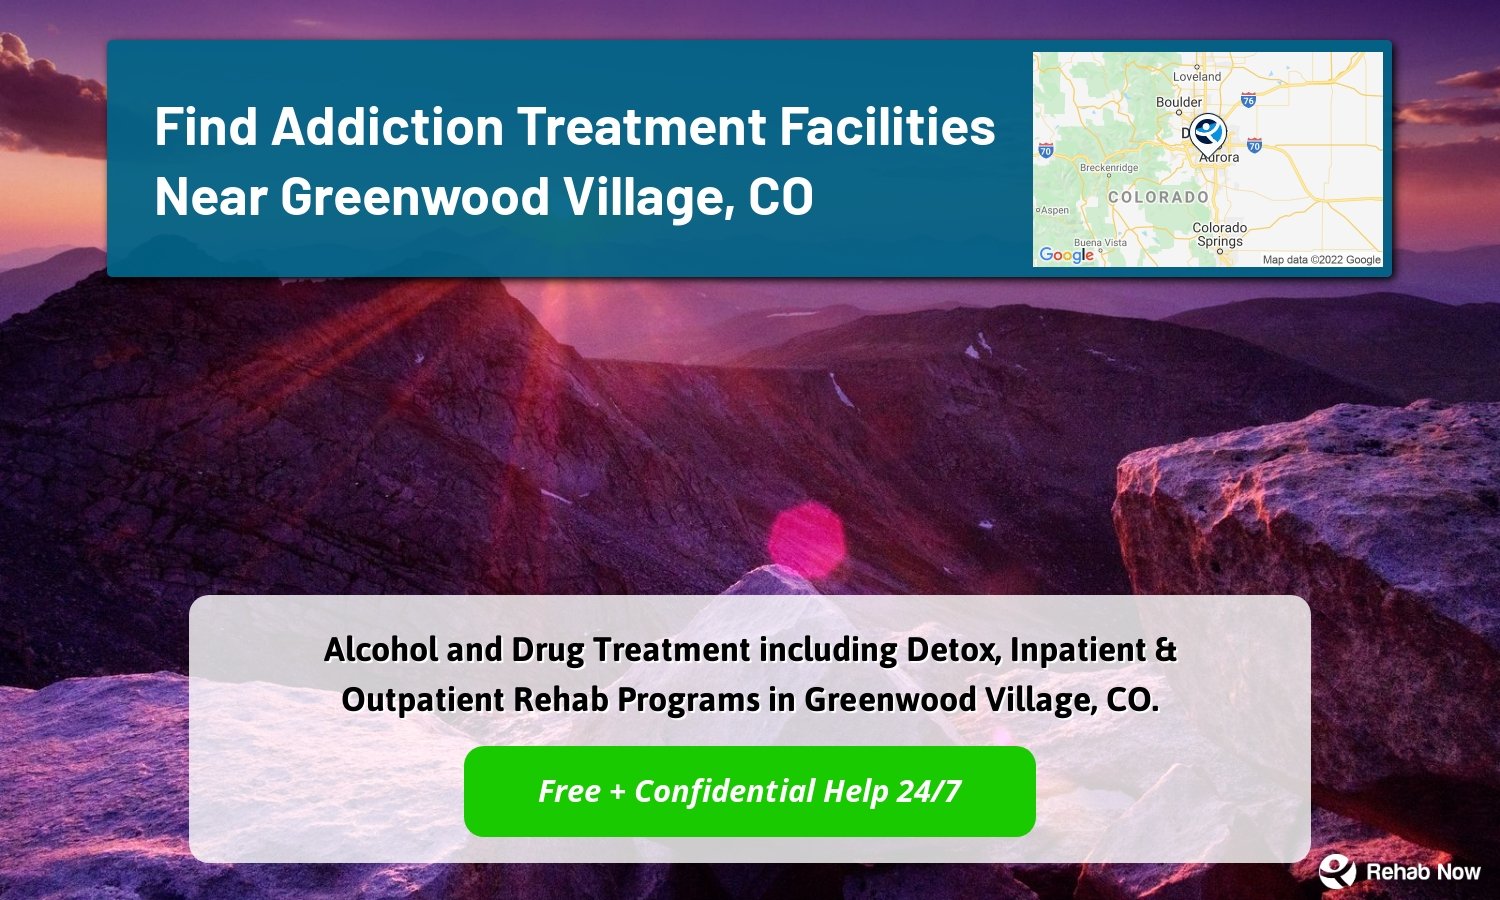 Alcohol and Drug Treatment including Detox, Inpatient & Outpatient Rehab Programs in Greenwood Village, CO.